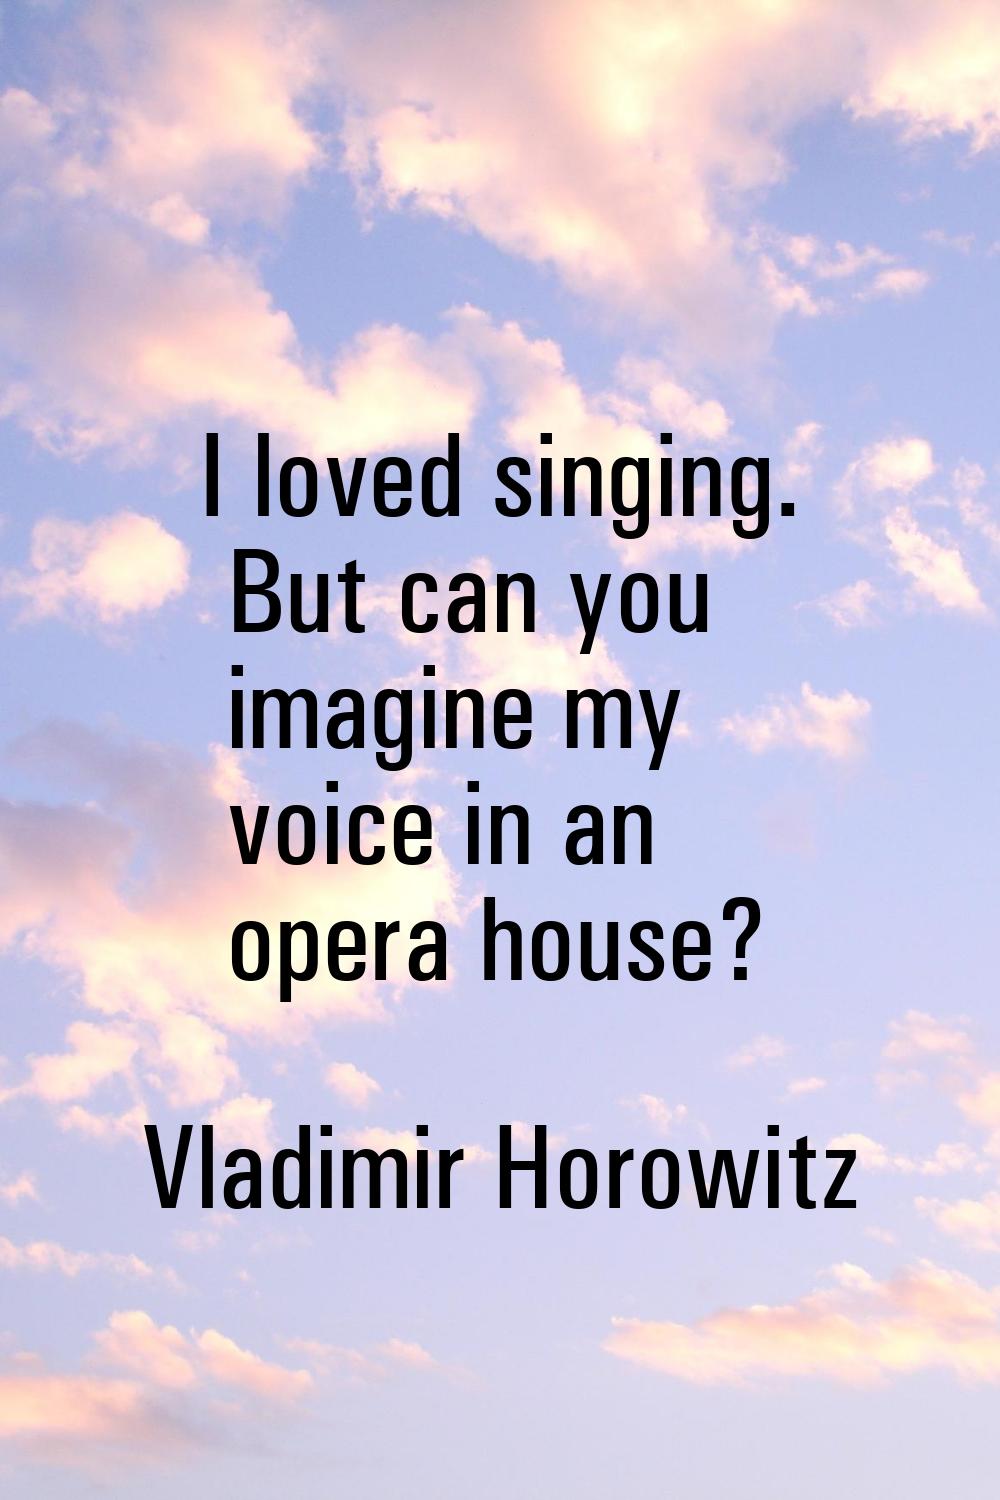 I loved singing. But can you imagine my voice in an opera house?